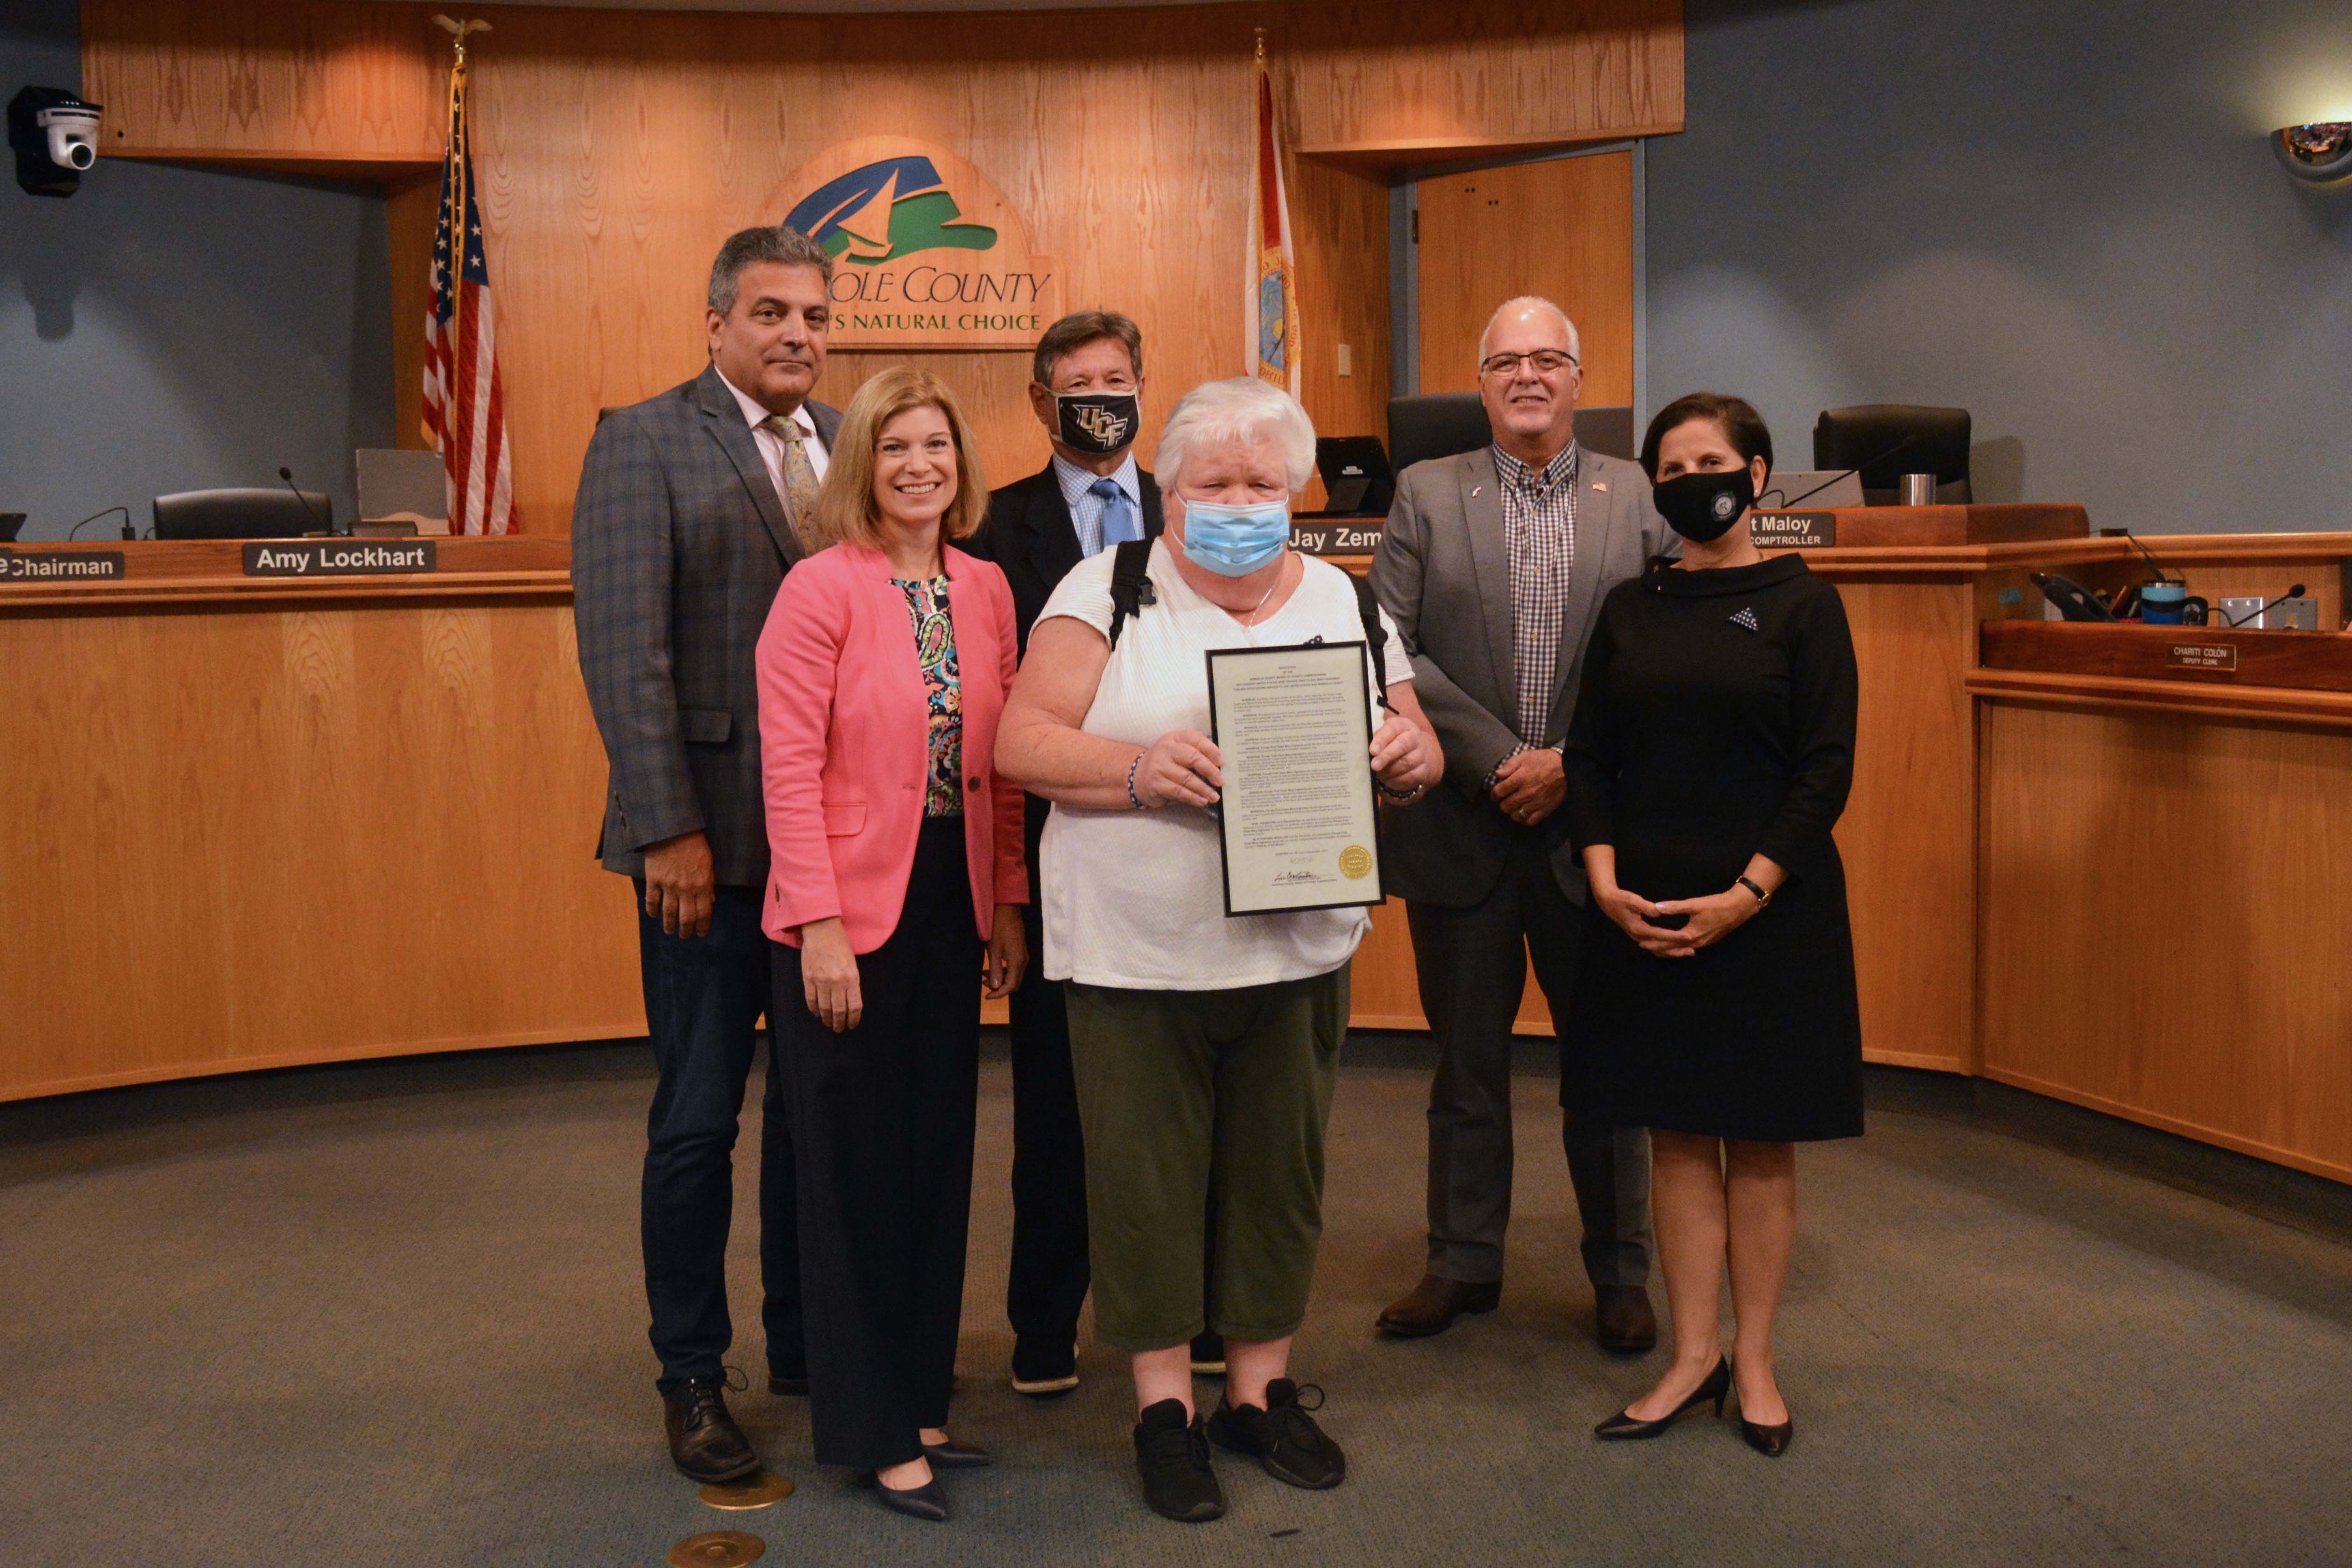 Resolution - Recognizing Private First Class Mary Ingrassia United States Army, as Seminole County’s September Veteran of the Month.(Private First Class Mary Ingrassia, United States Army)